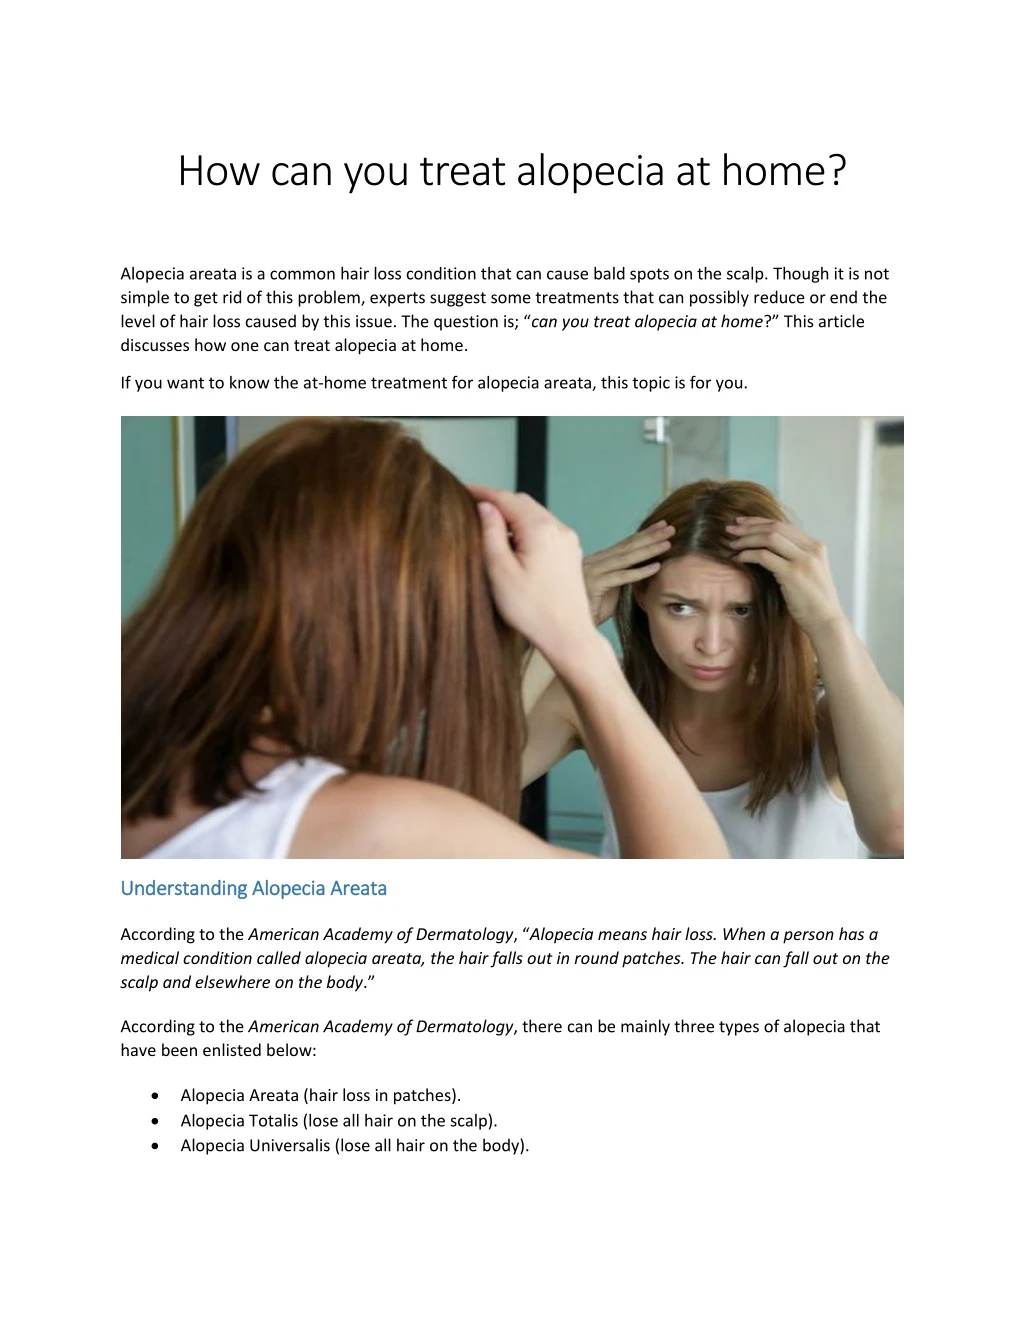 how can you treat alopecia at home